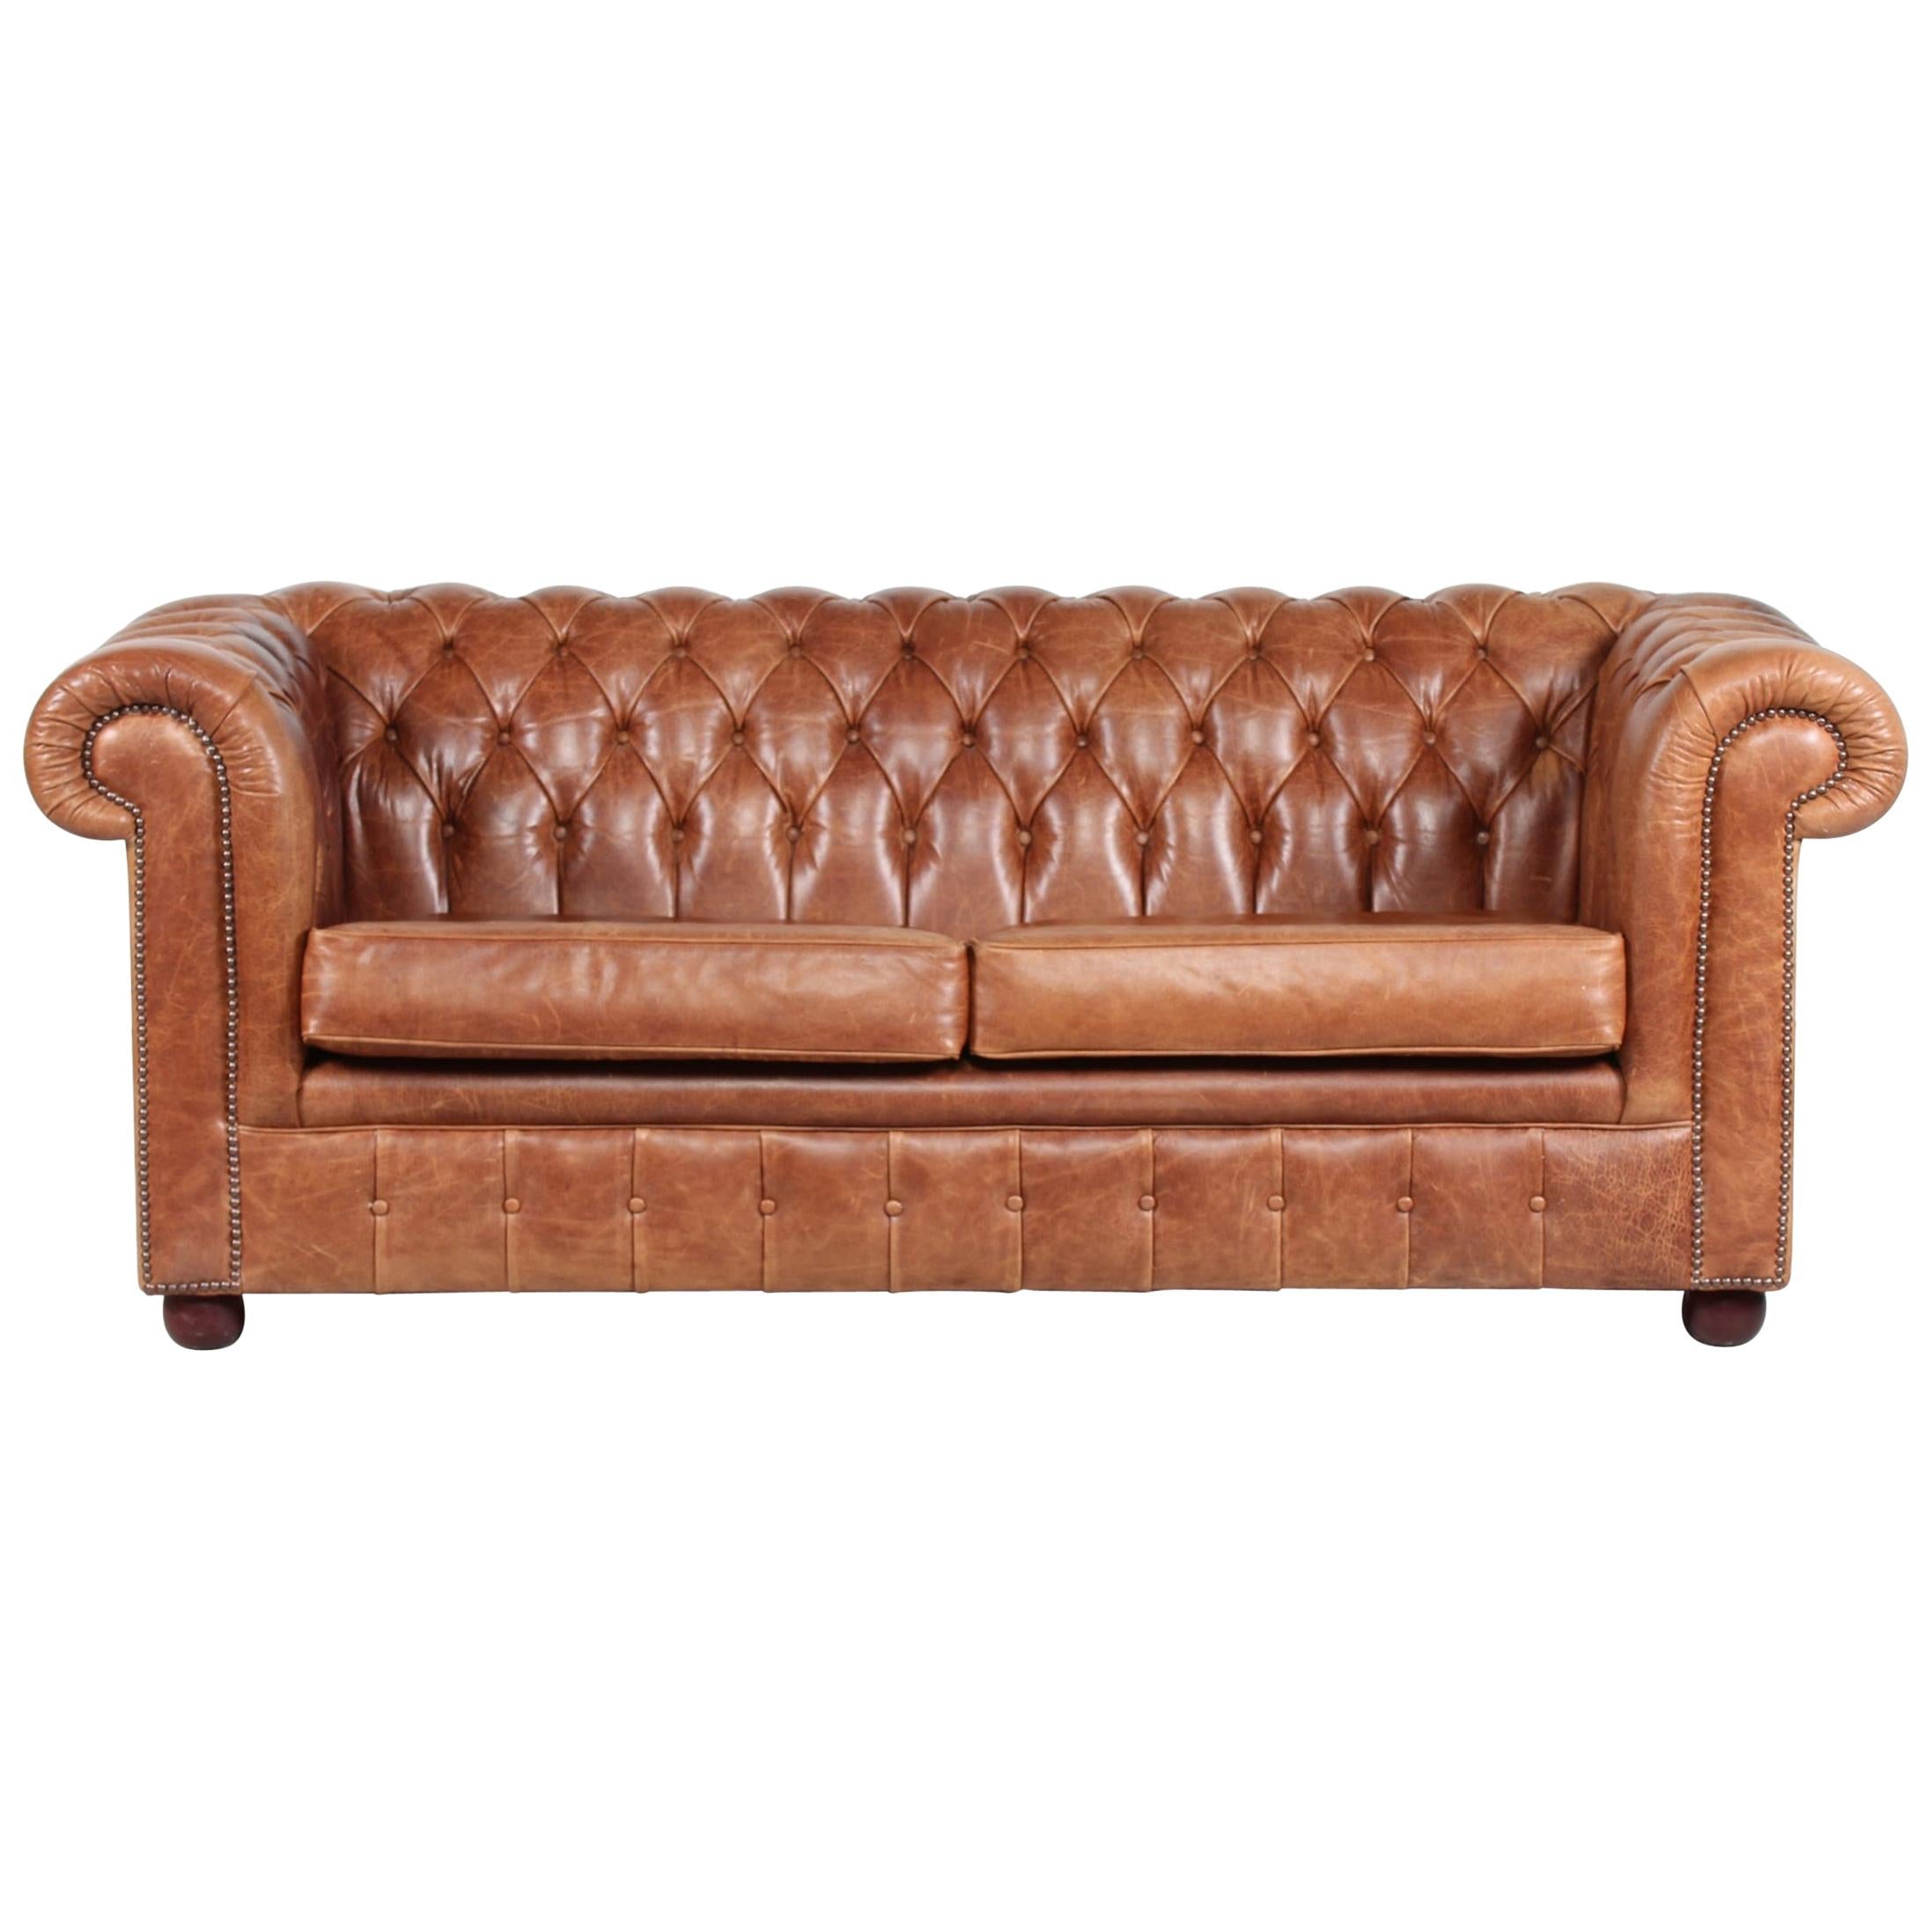 Vintage Chesterfield Sofa Cognac Leather Mounted with Numerous Buttons, 1970s